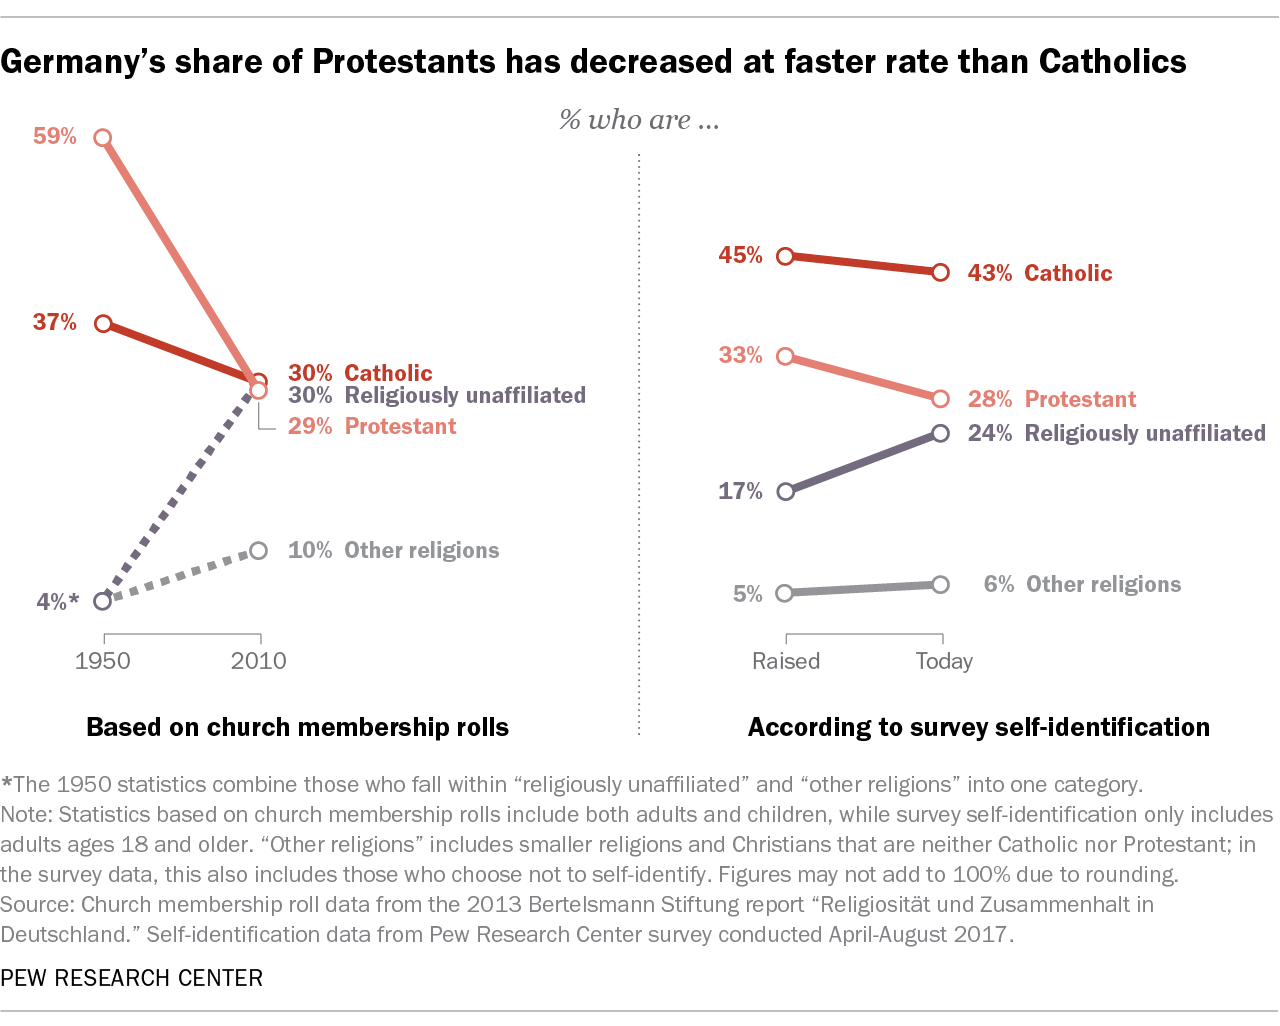 Germany's share of Protestants has decreased at a faster rate than Catholics